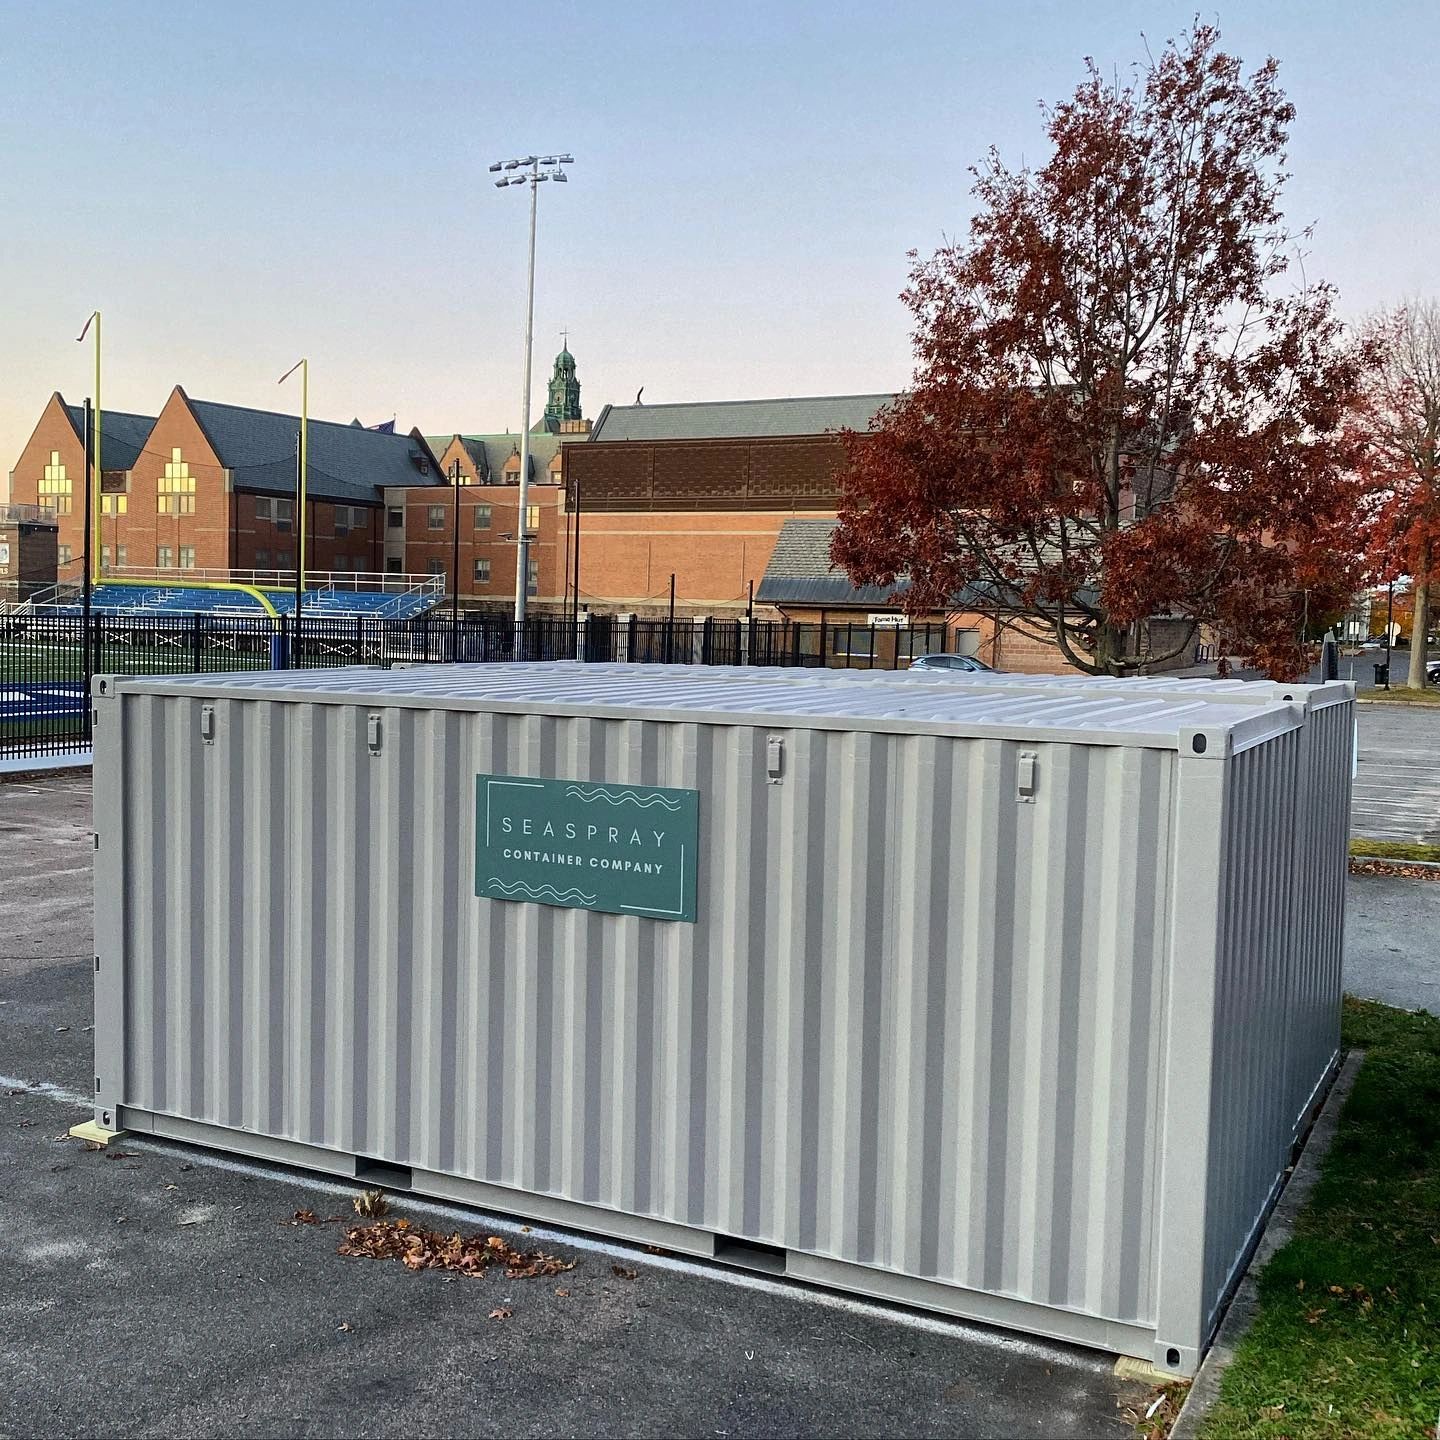 <img alt= "photo of two 20 foot containers side by side in front of high school" src="hq.jpg">